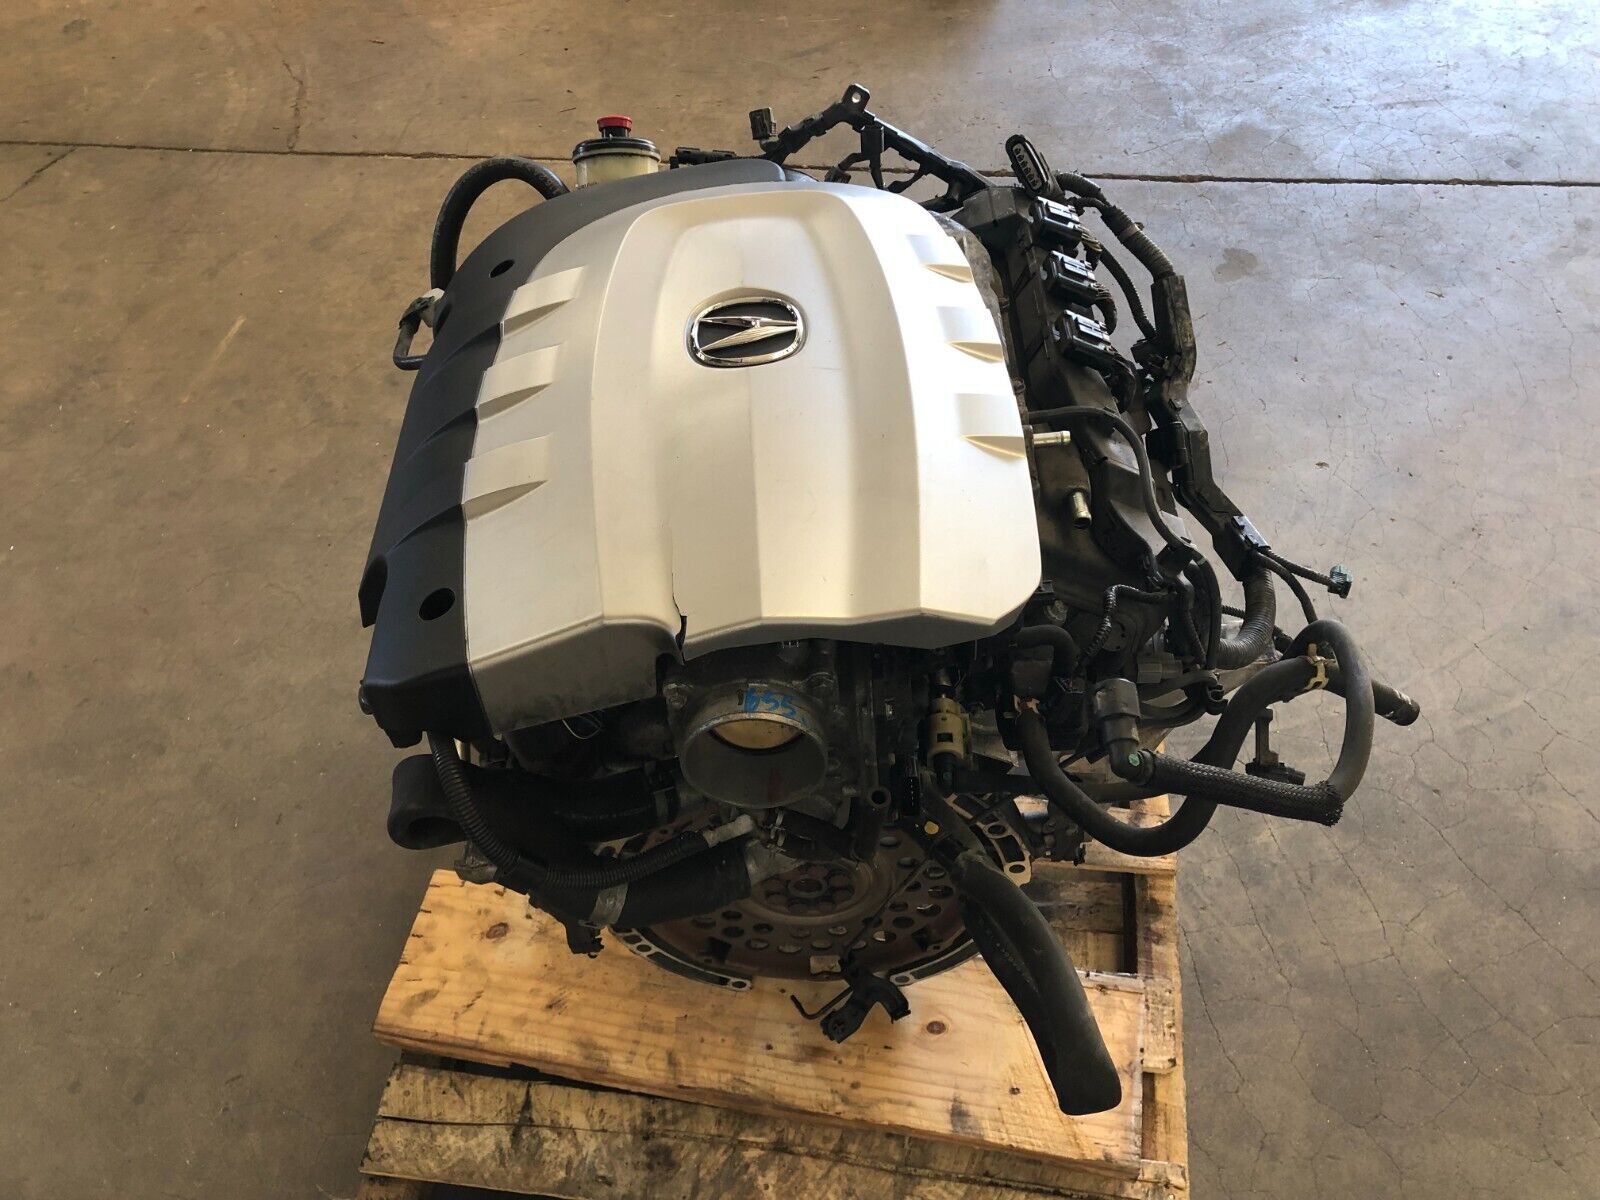 Acura MDX 3.7L V6 engines 2010 to 2013